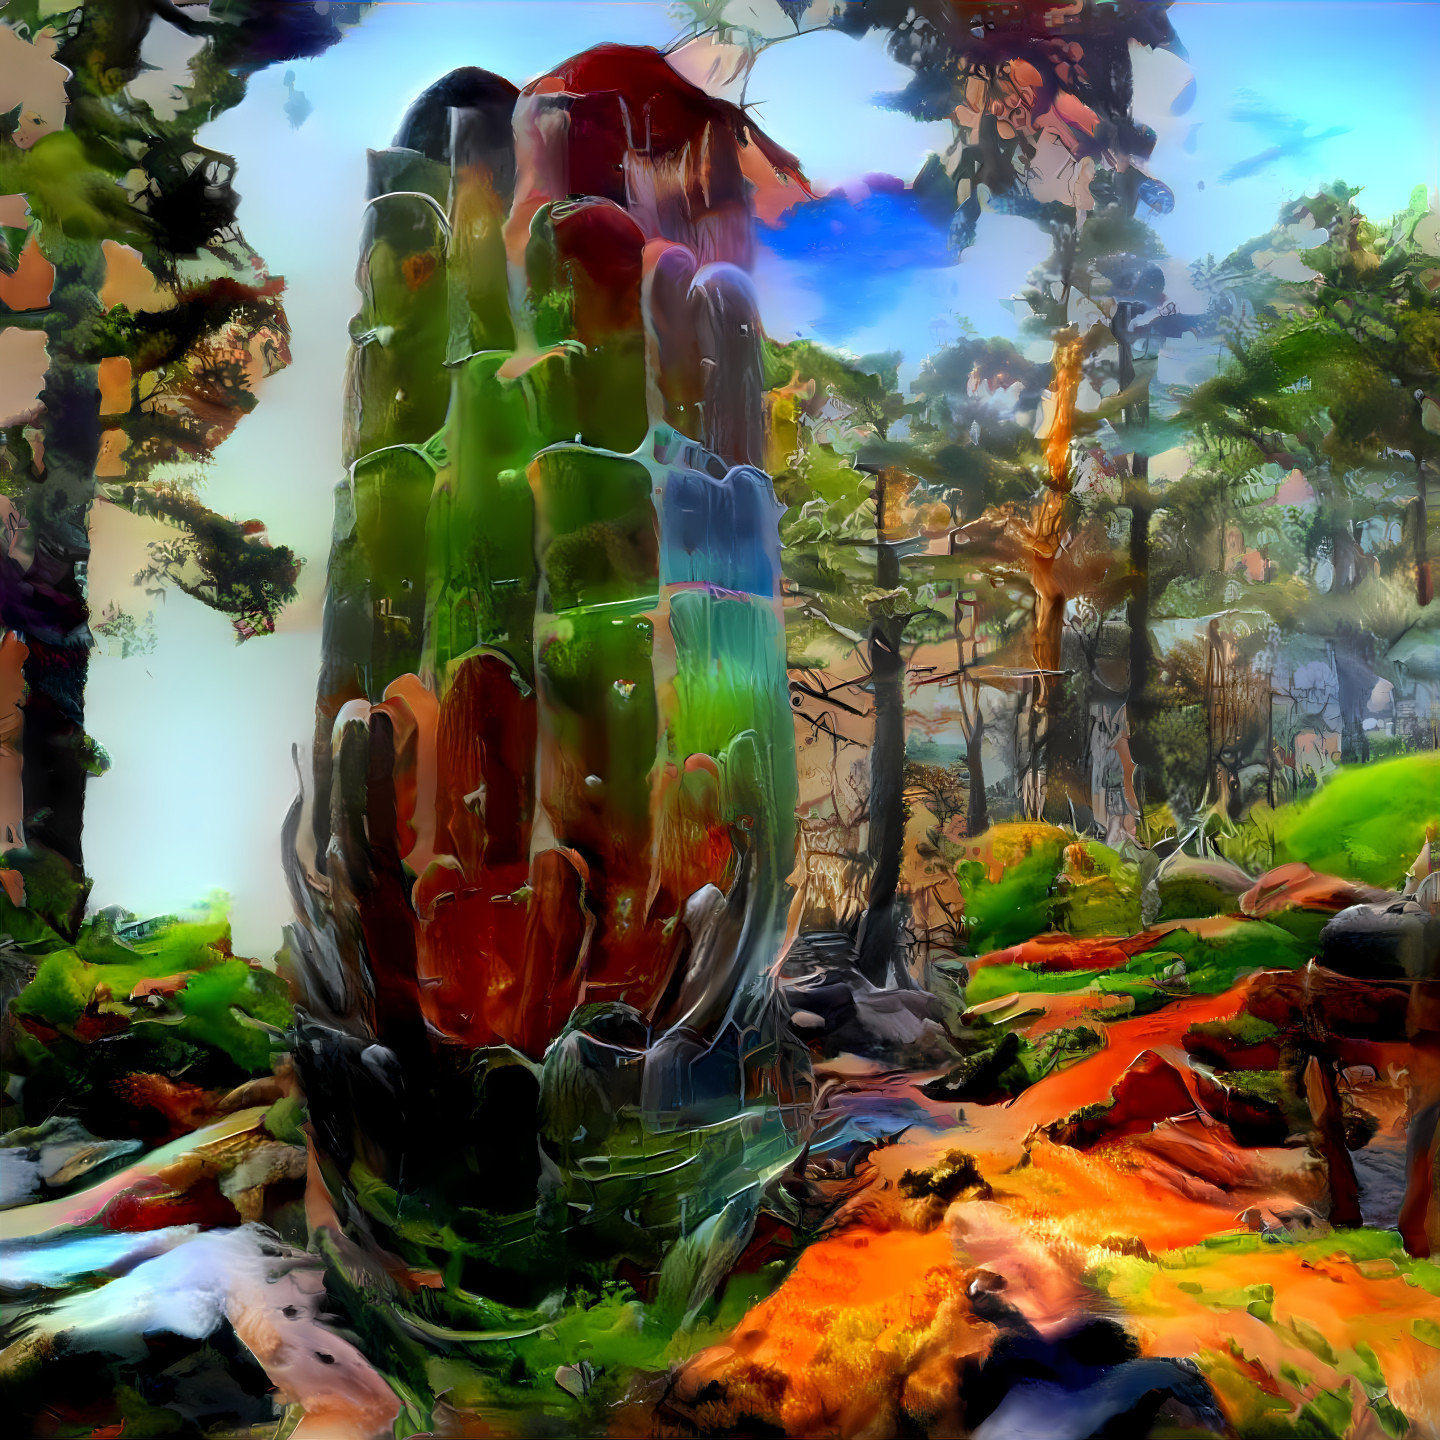 Fantasy: massive glass cactus growing in a forest.